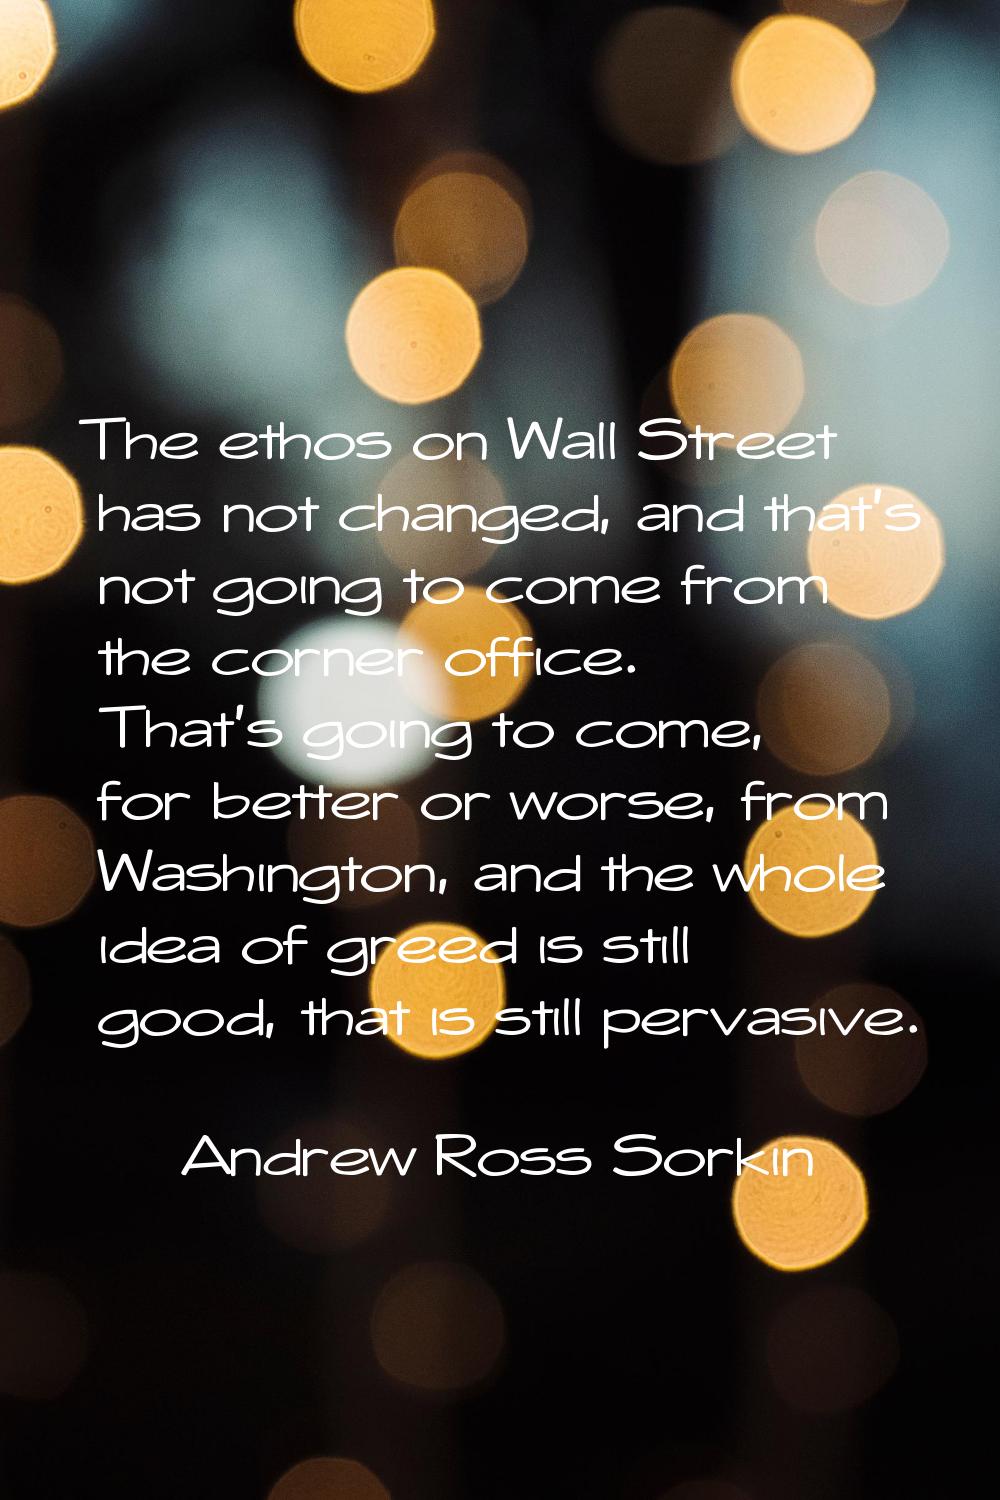 The ethos on Wall Street has not changed, and that's not going to come from the corner office. That